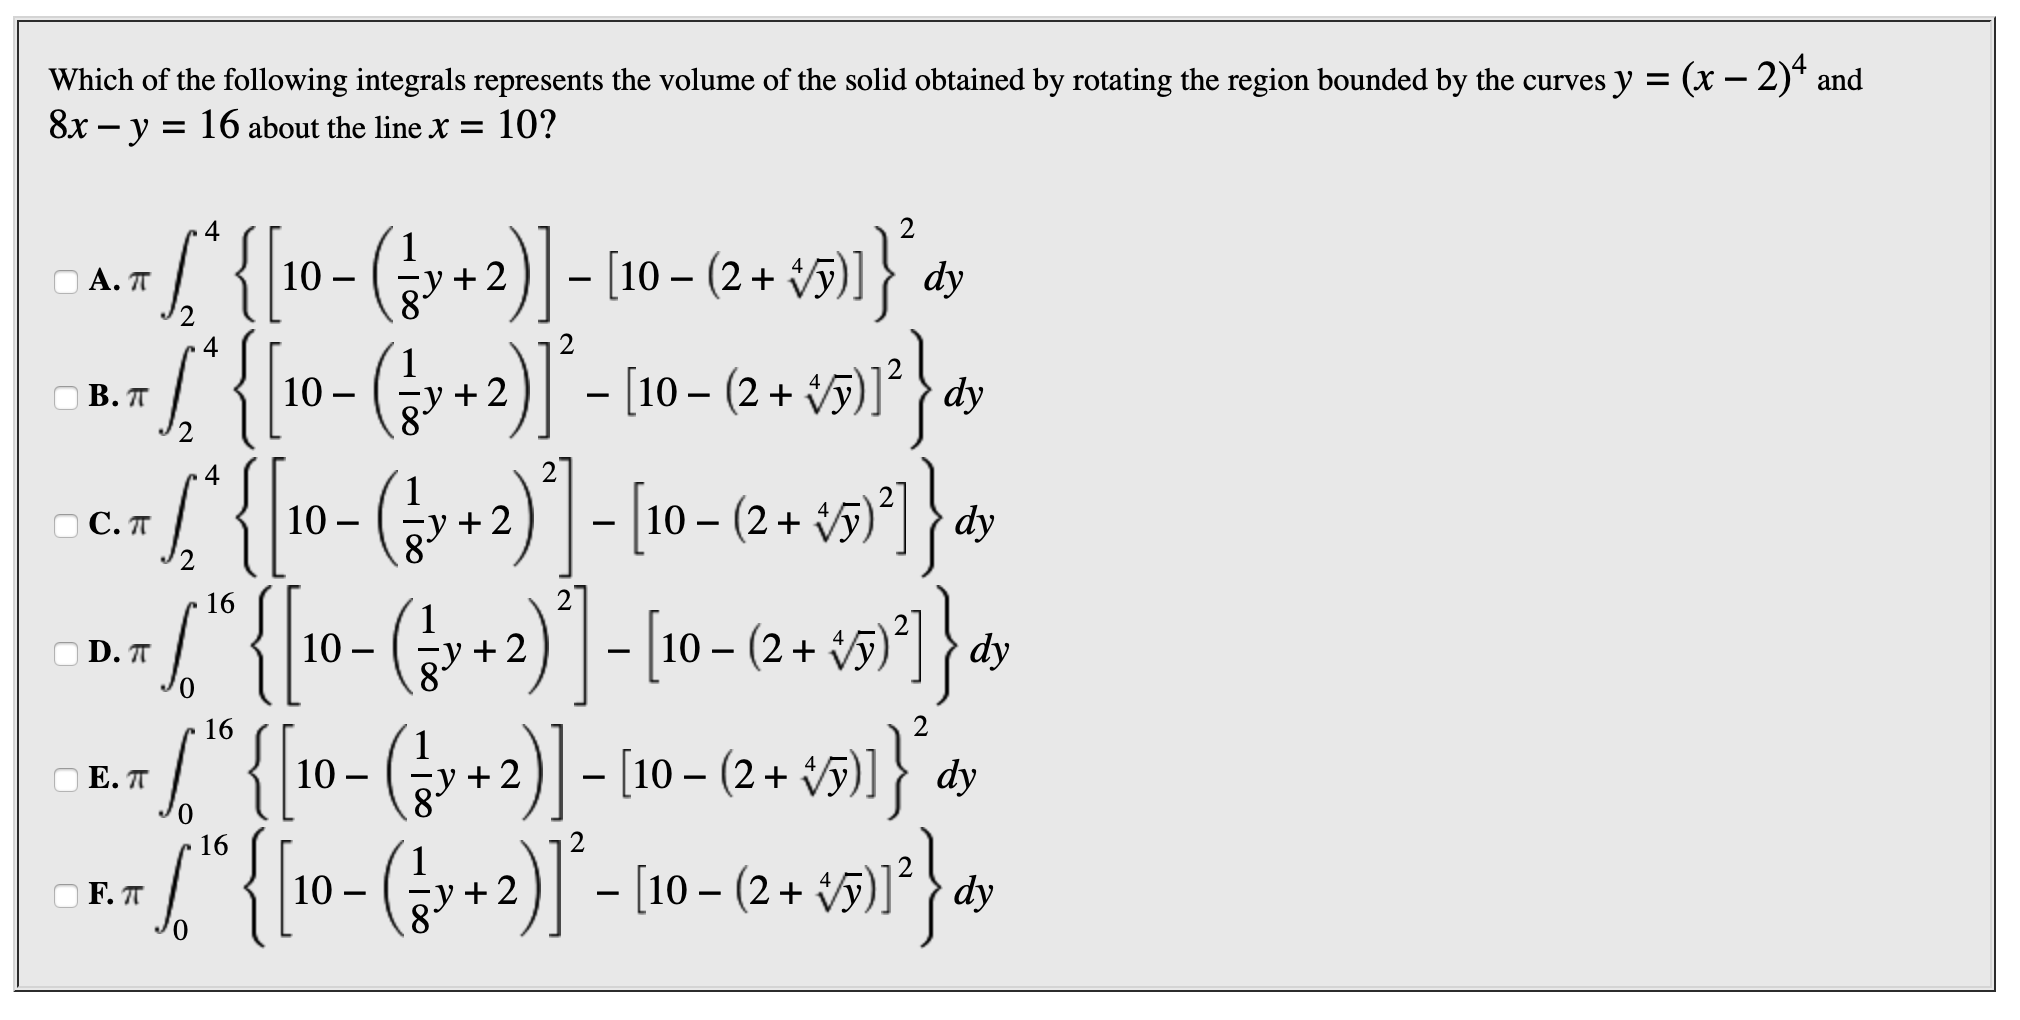 Which of the following integrals represents the volume of the solid obtained by rotating the region bounded by the curves y = (x - 2)* and
8x -y = 16 about the line X = 10?
2
4
S{10-(y+2)- 10- (2+ 5]
А. П
4
2)[10- (2+
dy
10
В. П
2
2- 10-(2+1
(r+2)0-(2+
10-(+2- 10- (2+ )
*{[10-(+2)]"- 10-(2.
10
С.П
2
27
16
dy
10
D.T
2
Е. П
)F. п
